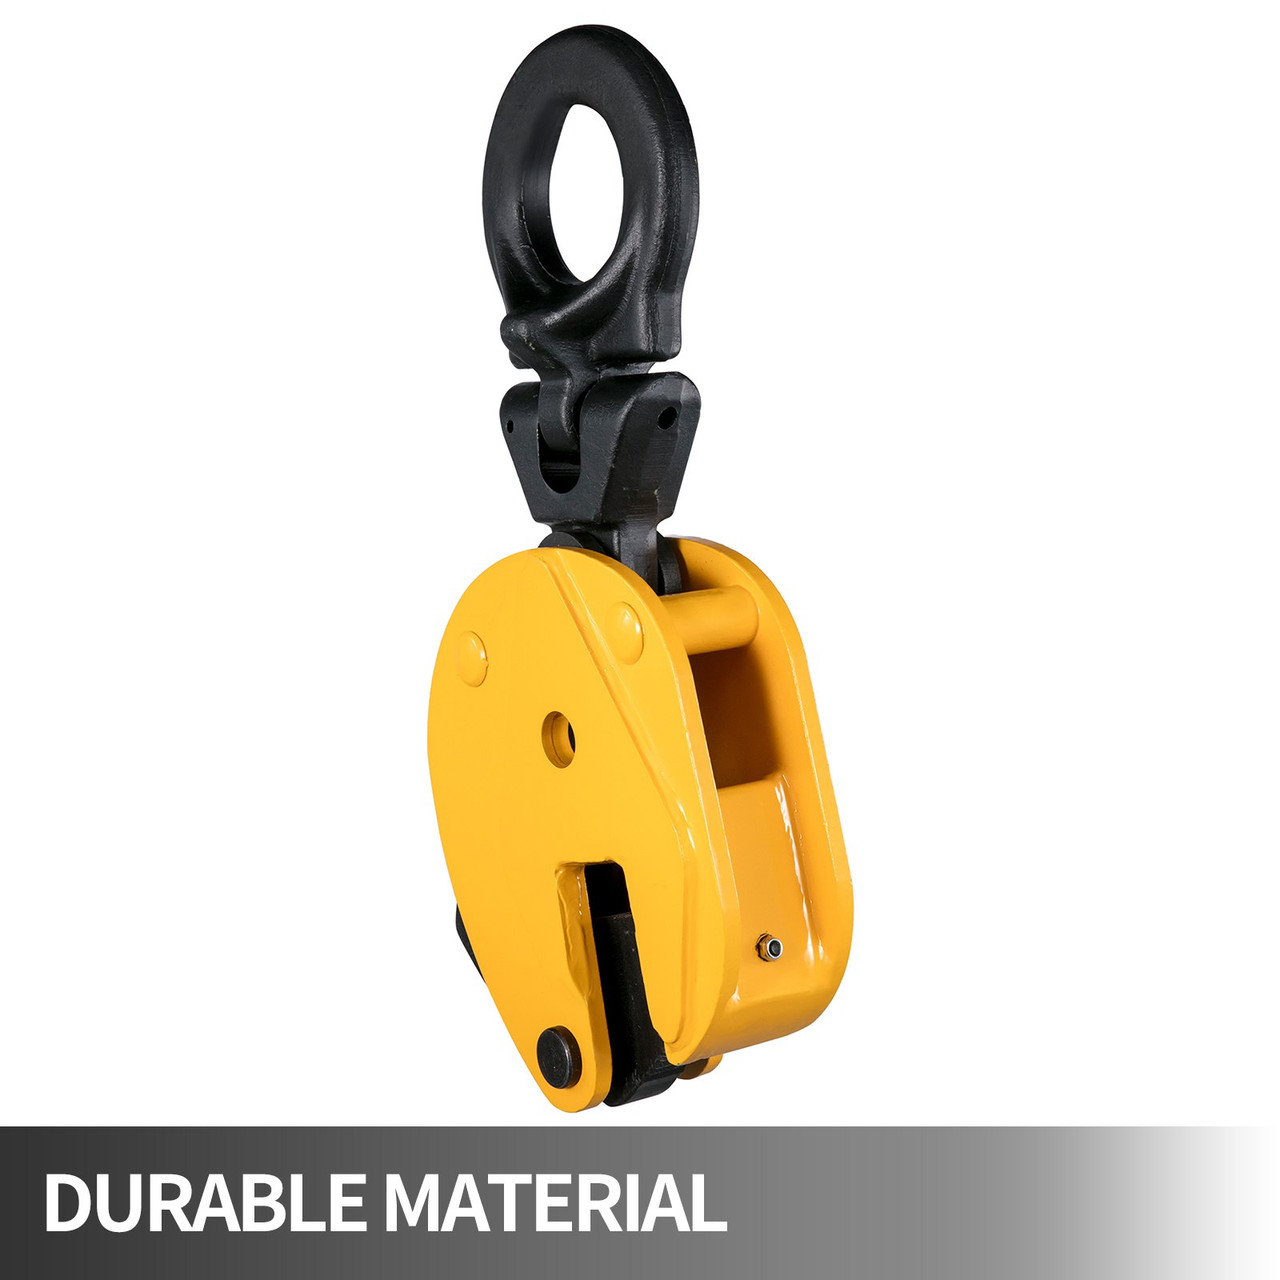 Lifting Clamp 11000Lbs/5T, Working Load Vertical Plate Clamp 0-1.2inch/30mm Jaw Opening, Industrial Steel Plate Clamp Sheet Metal Lifting Clamp Plate Lifting Clamp Handling Lifting Equipment